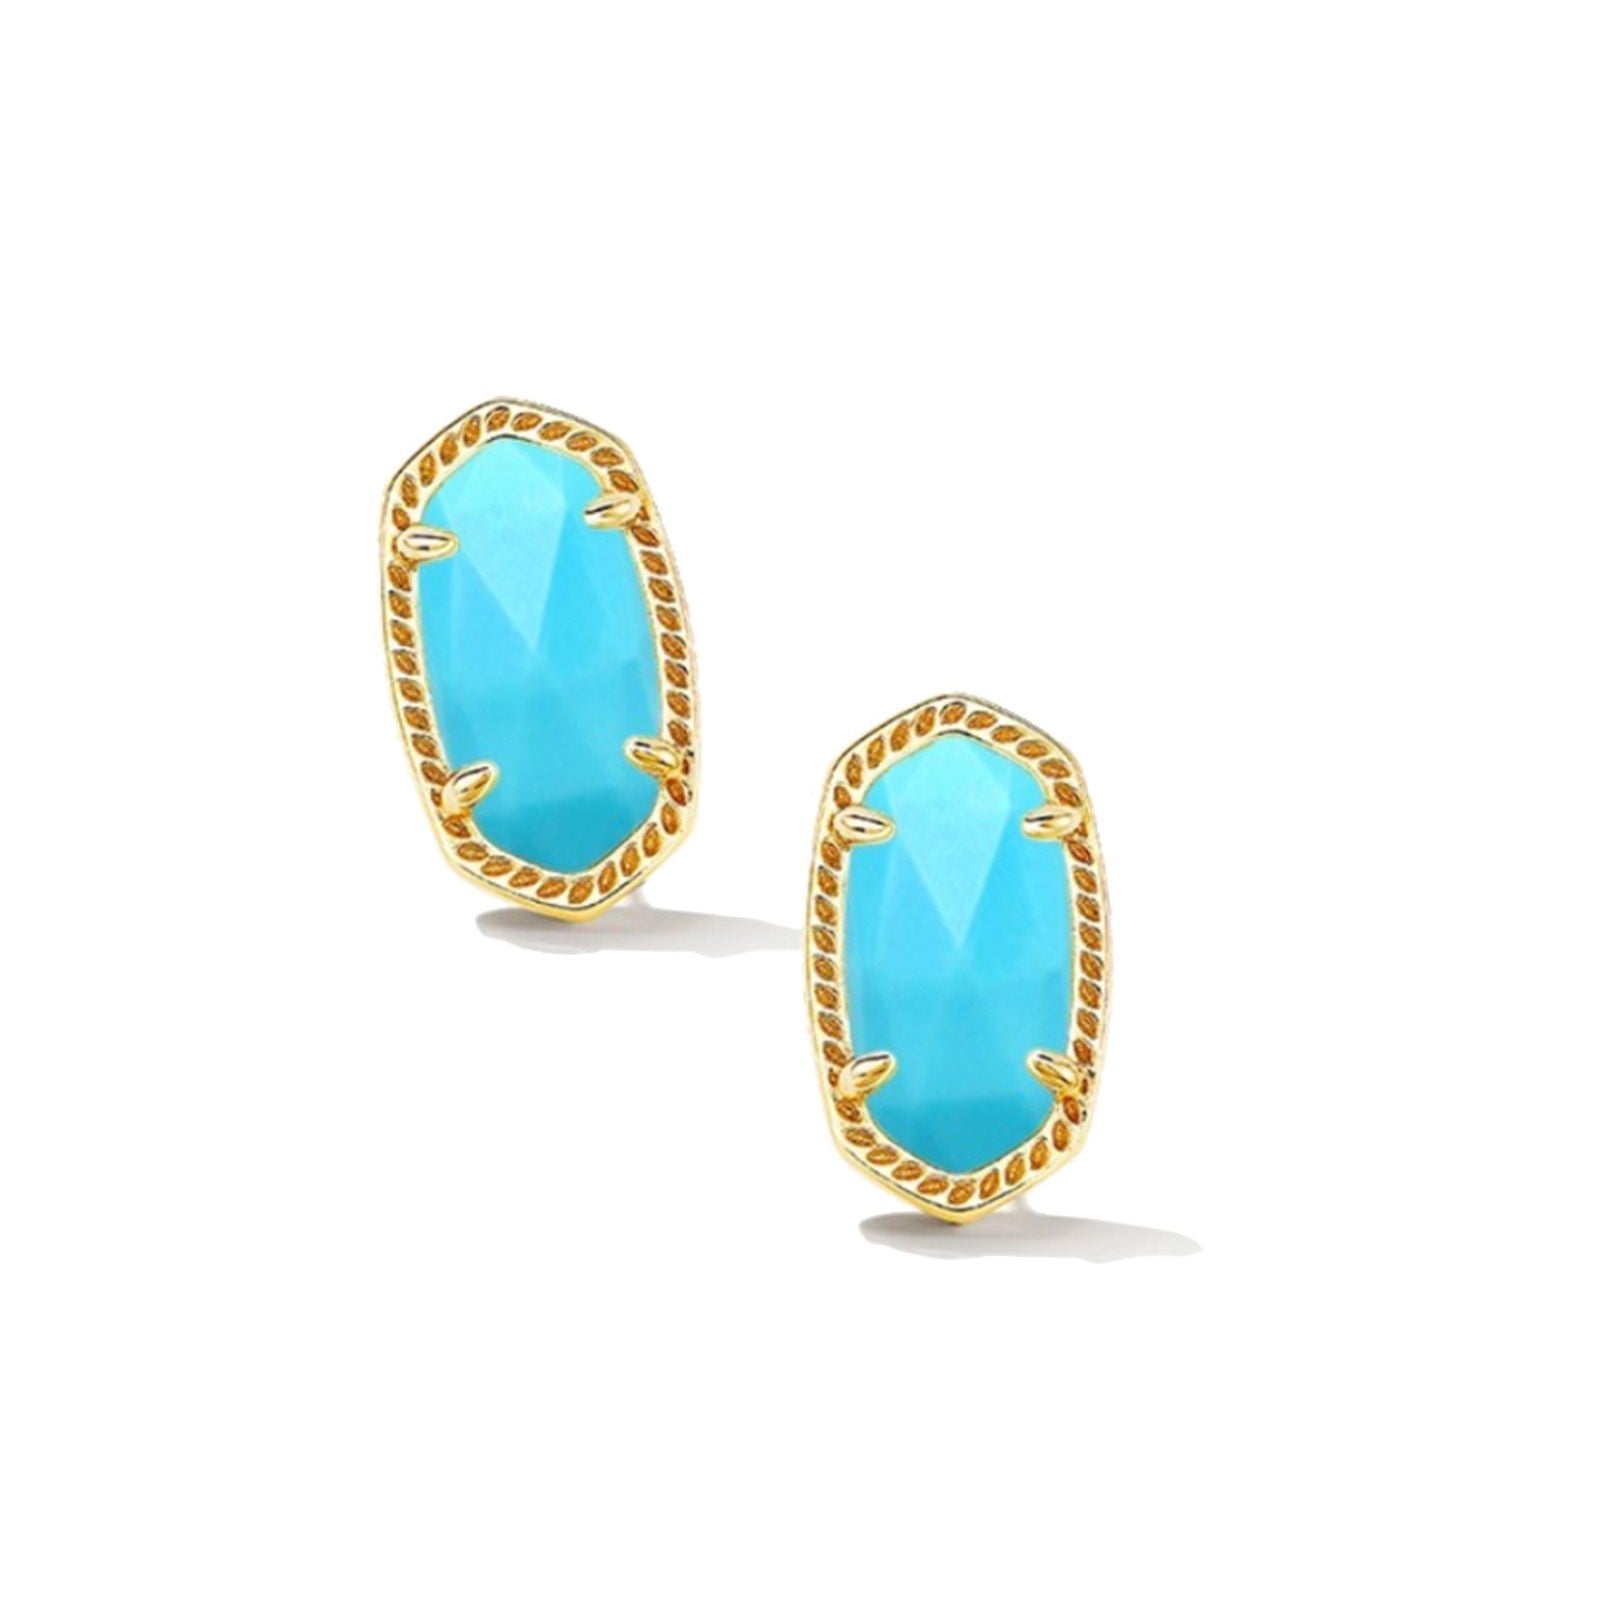 Kendra Scott | Ellie Gold Stud Earrings in Variegated Turquoise Magnesite - Giddy Up Glamour Boutique